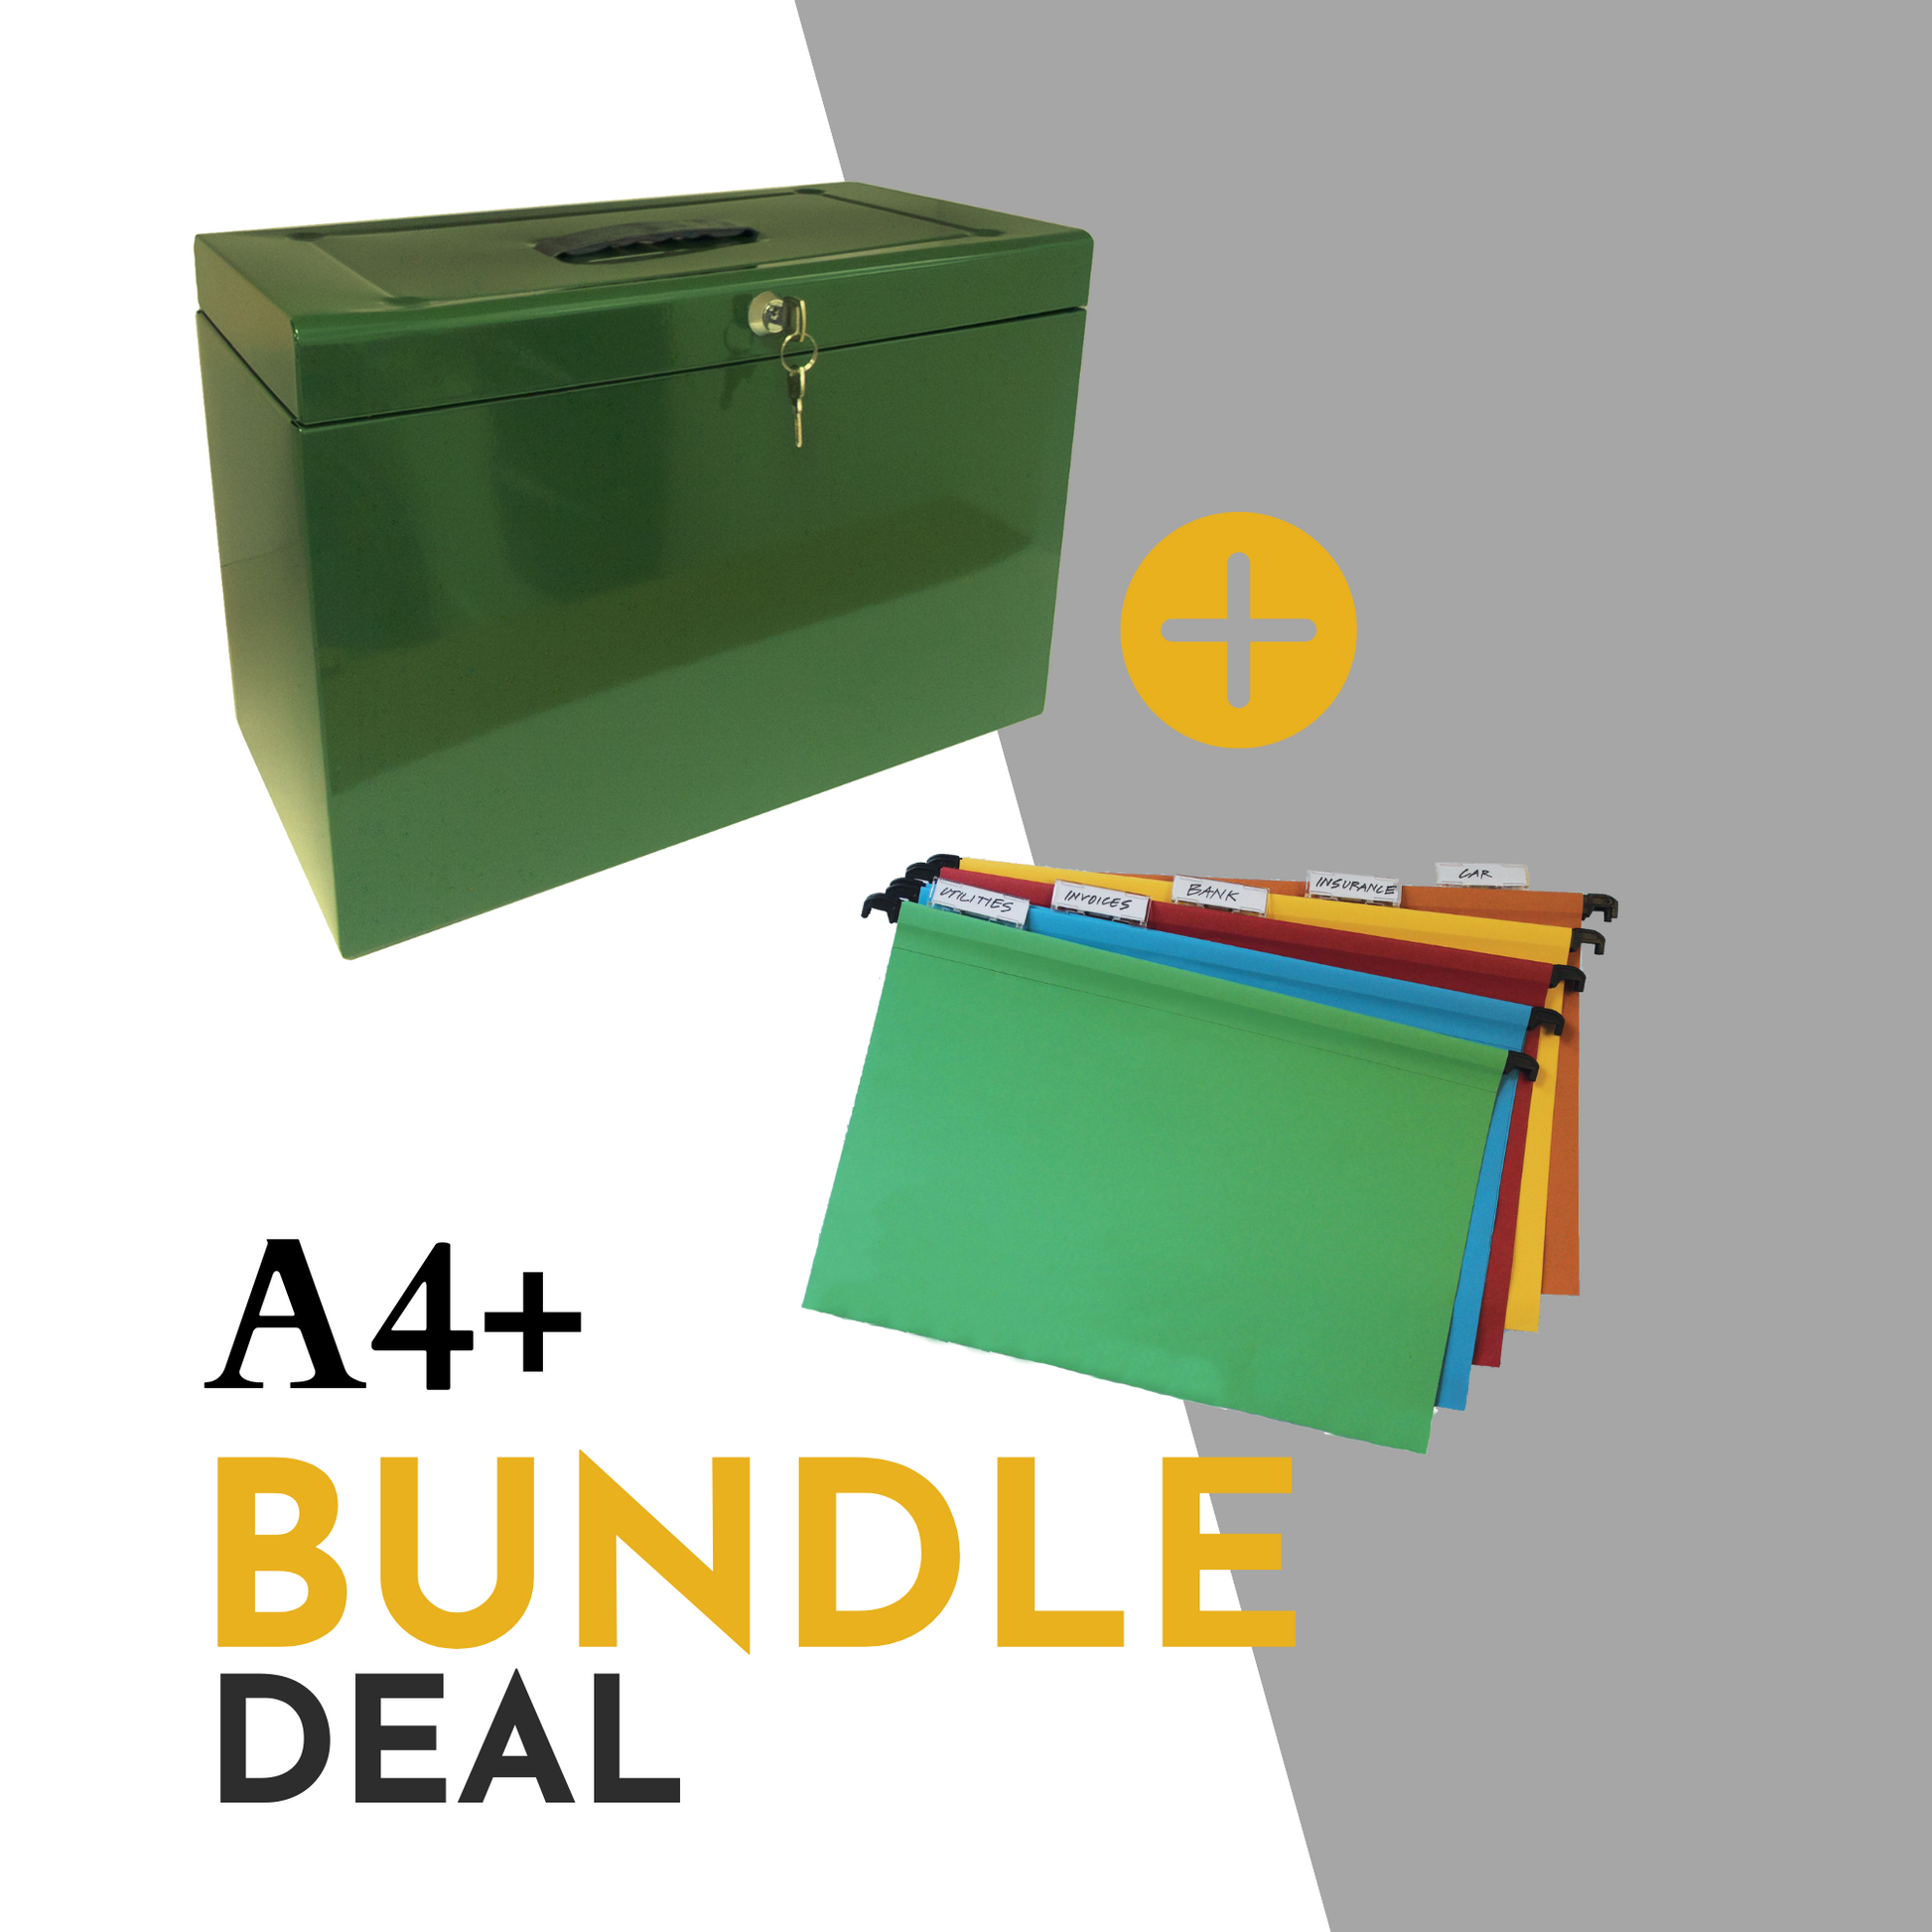 Promotional image for an A4+ (Foolscap Sized) file storage bundle deal, including a British racing green file box with a handle and key lock, plus an additional set of 10 assorted colour Foolscap suspension files with index tabs, showcasing an organized filing solution.